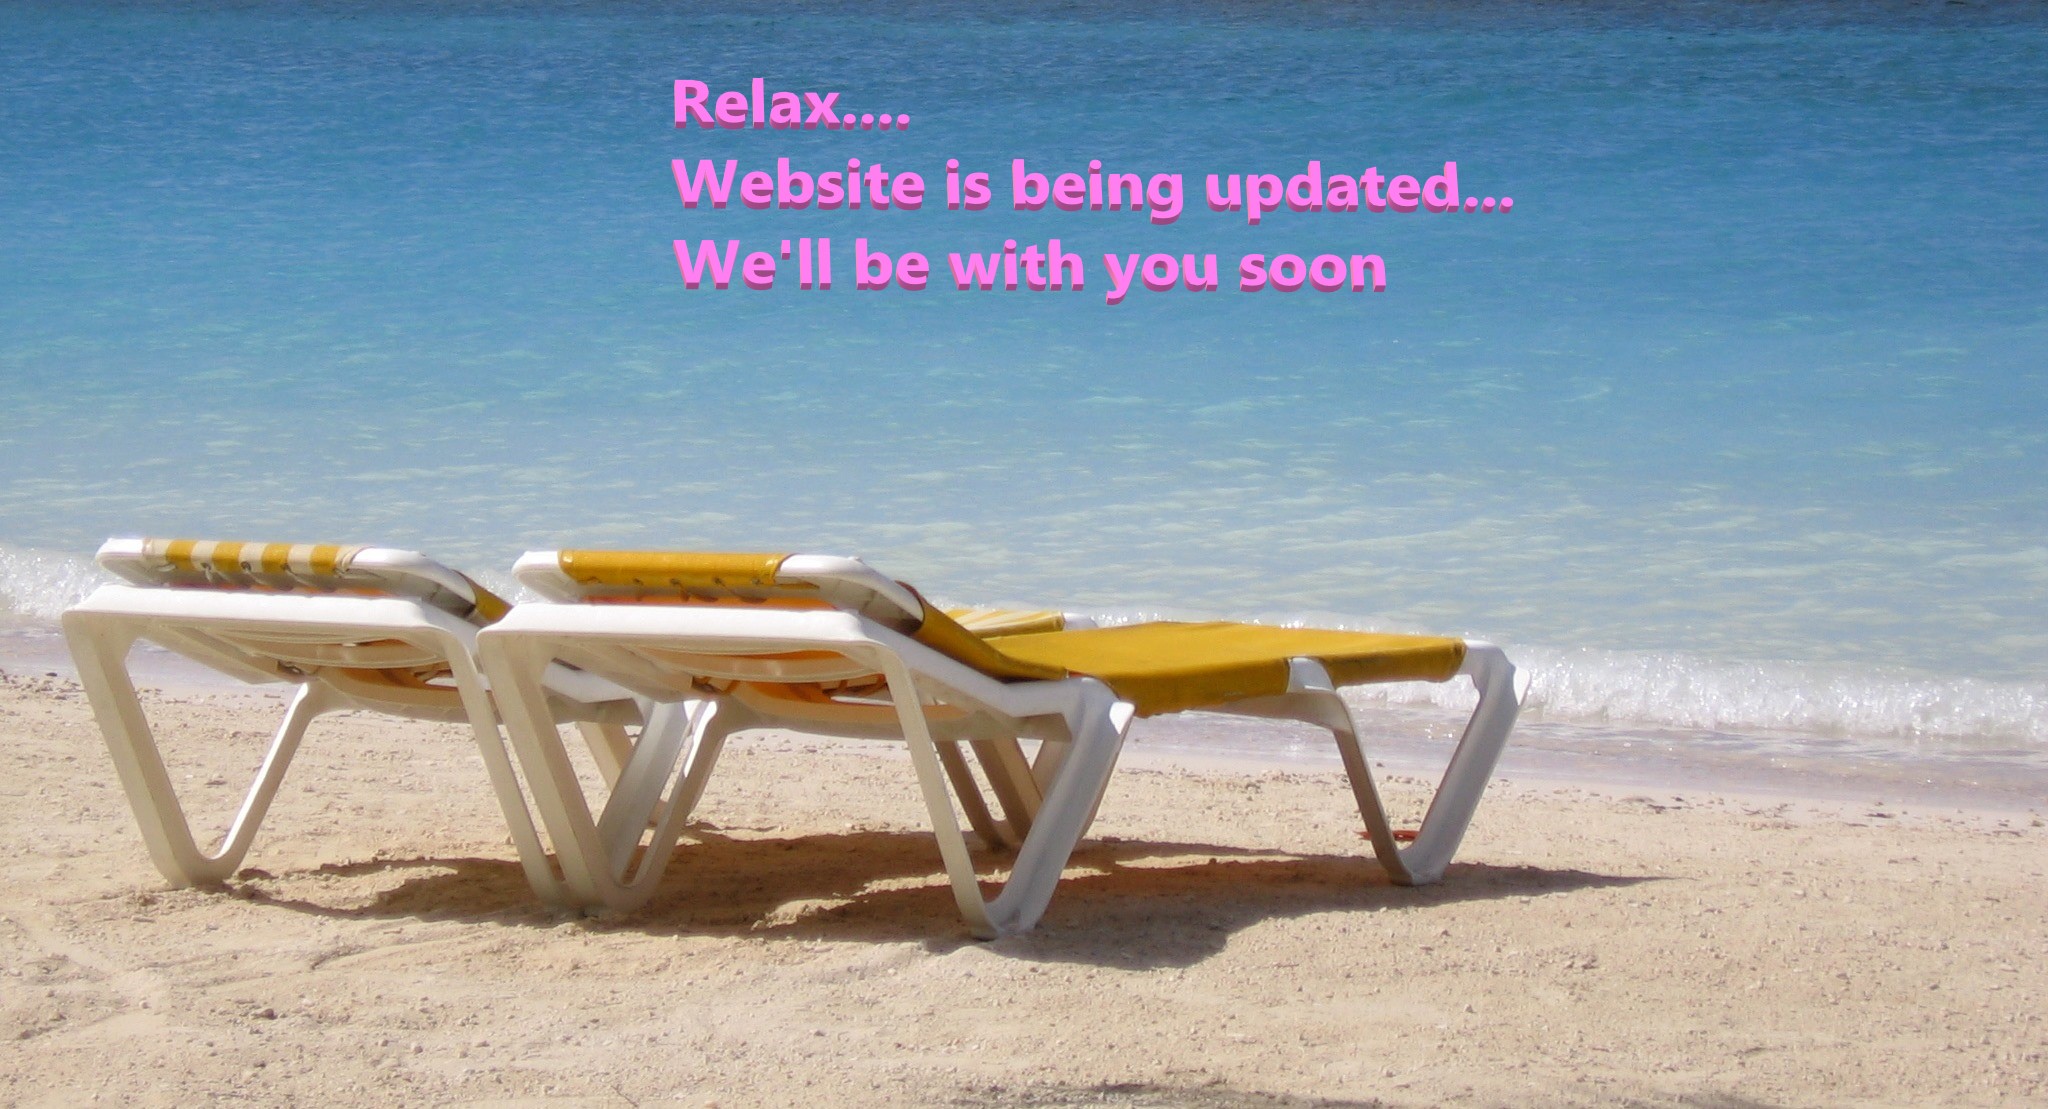 Relax Website is Being Updated...We'll be with you soon